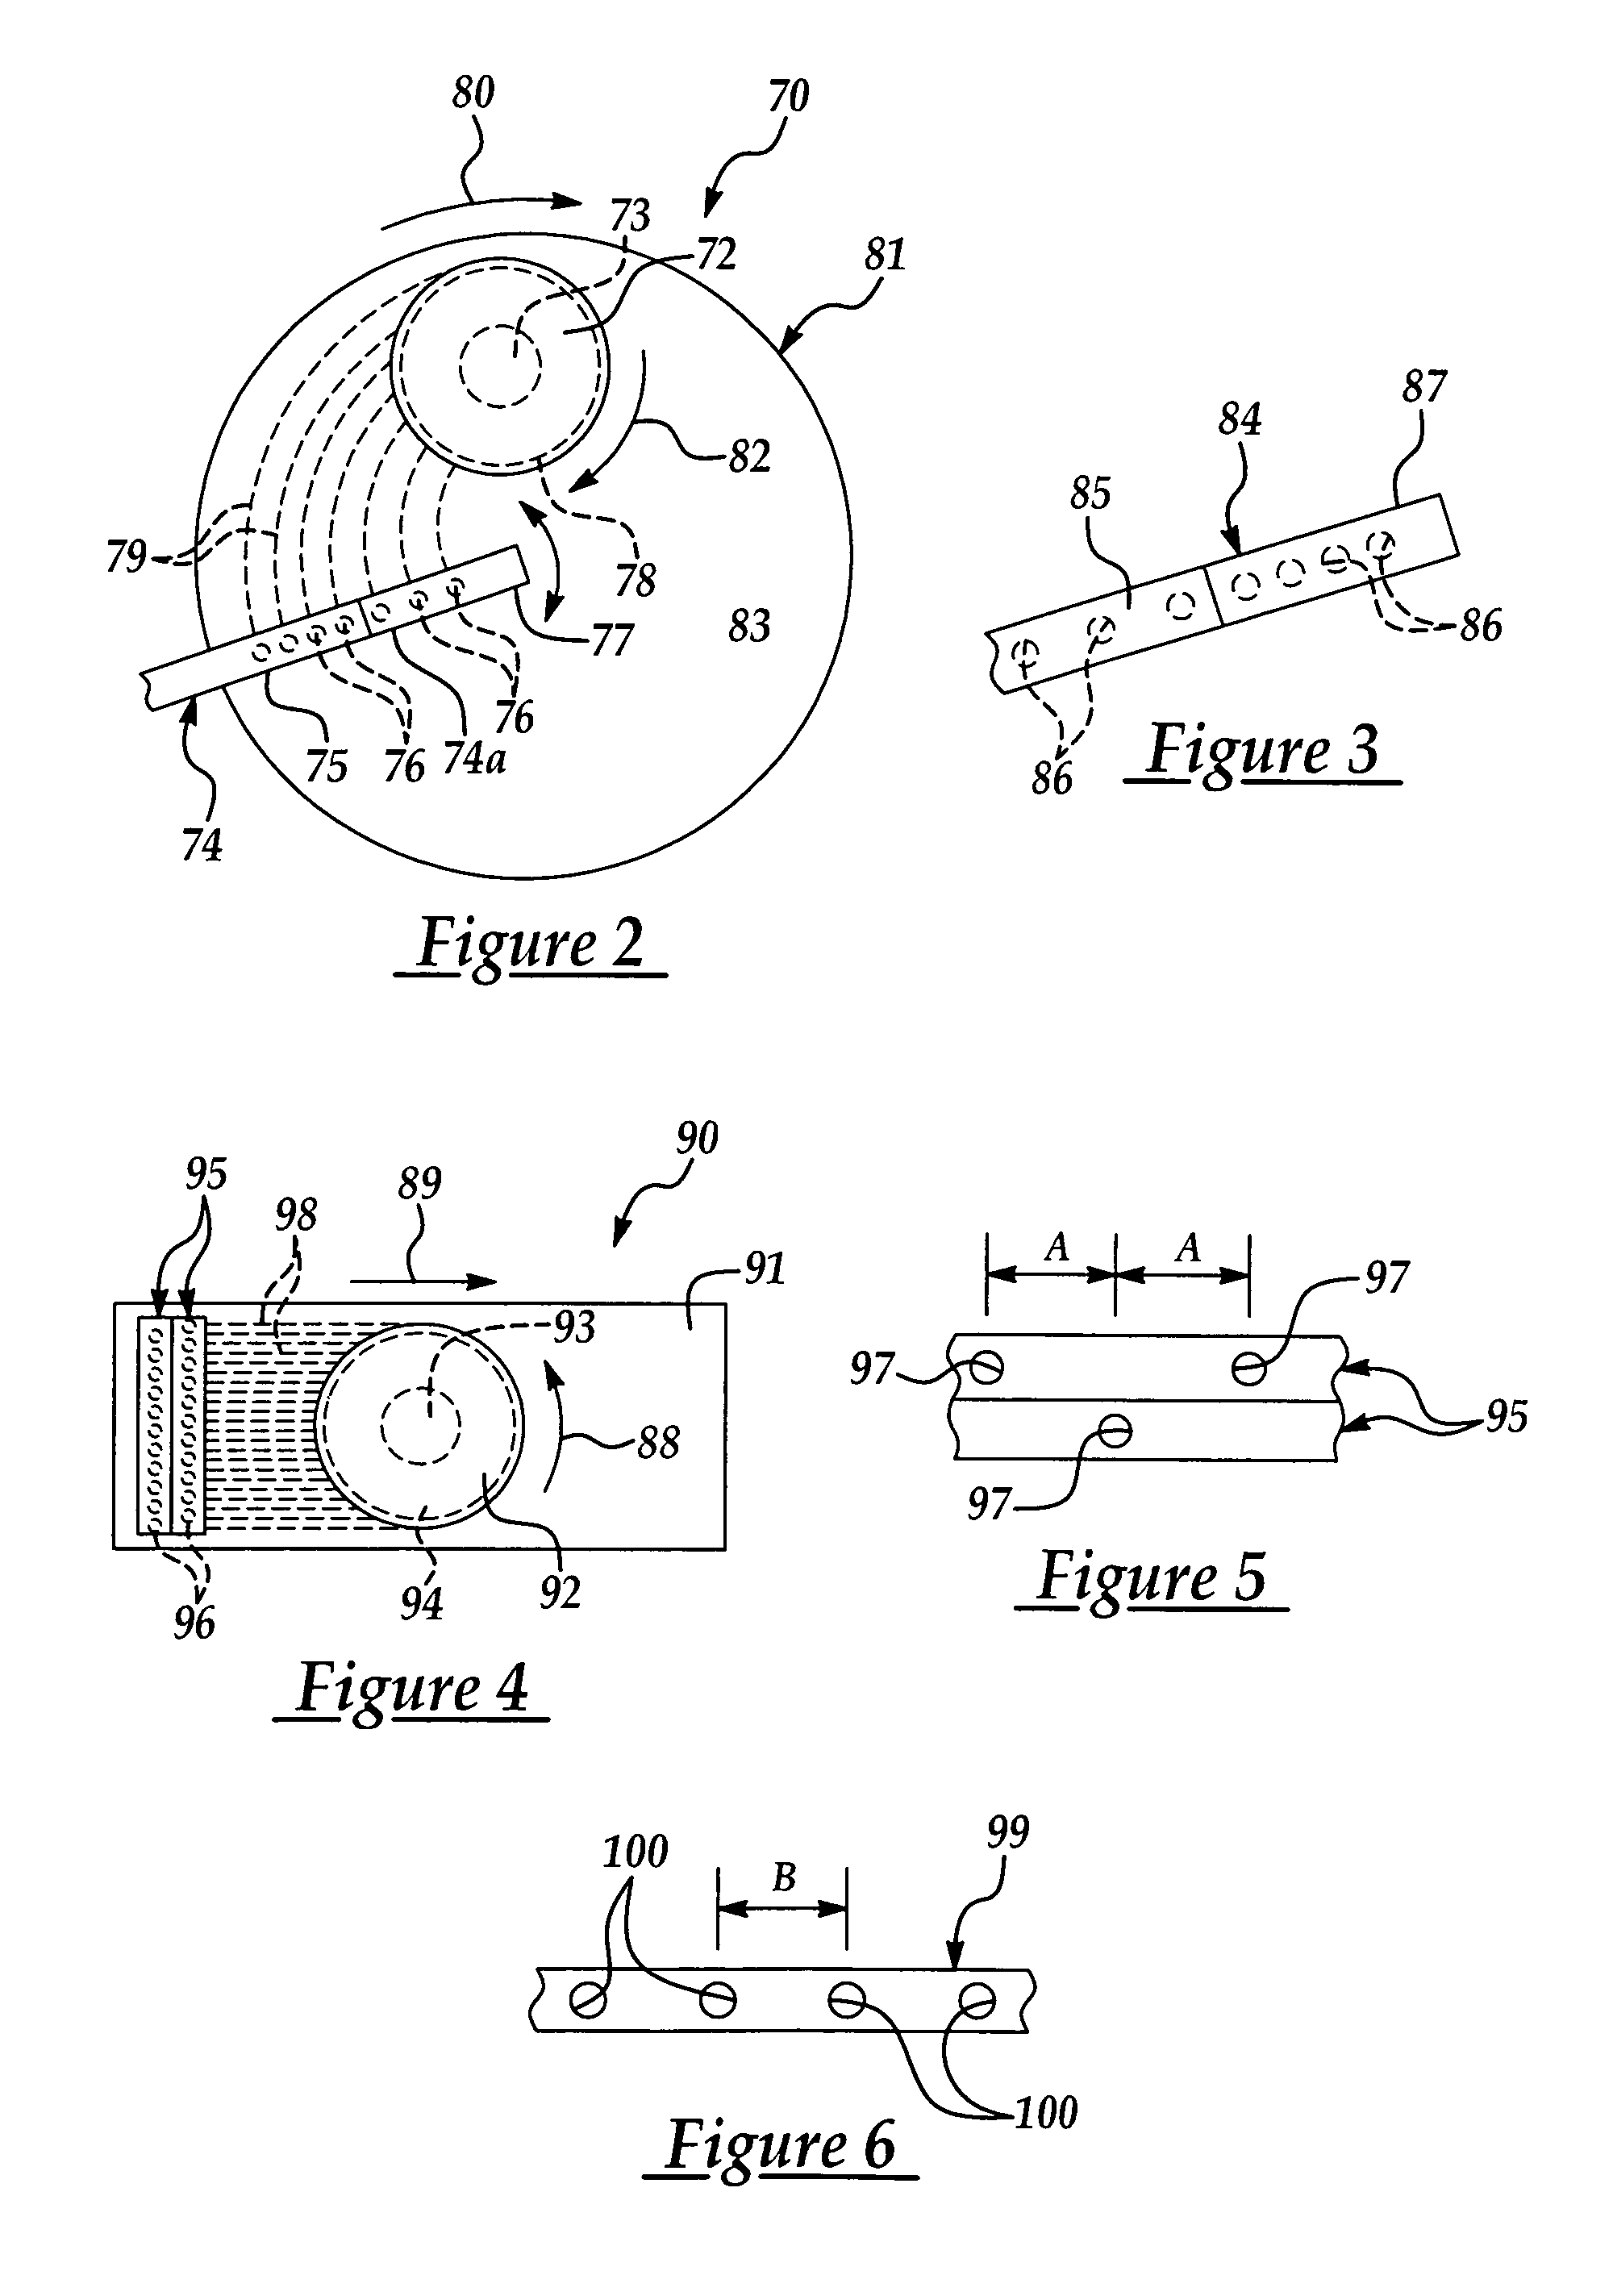 Methods for enhancing within-wafer CMP uniformity